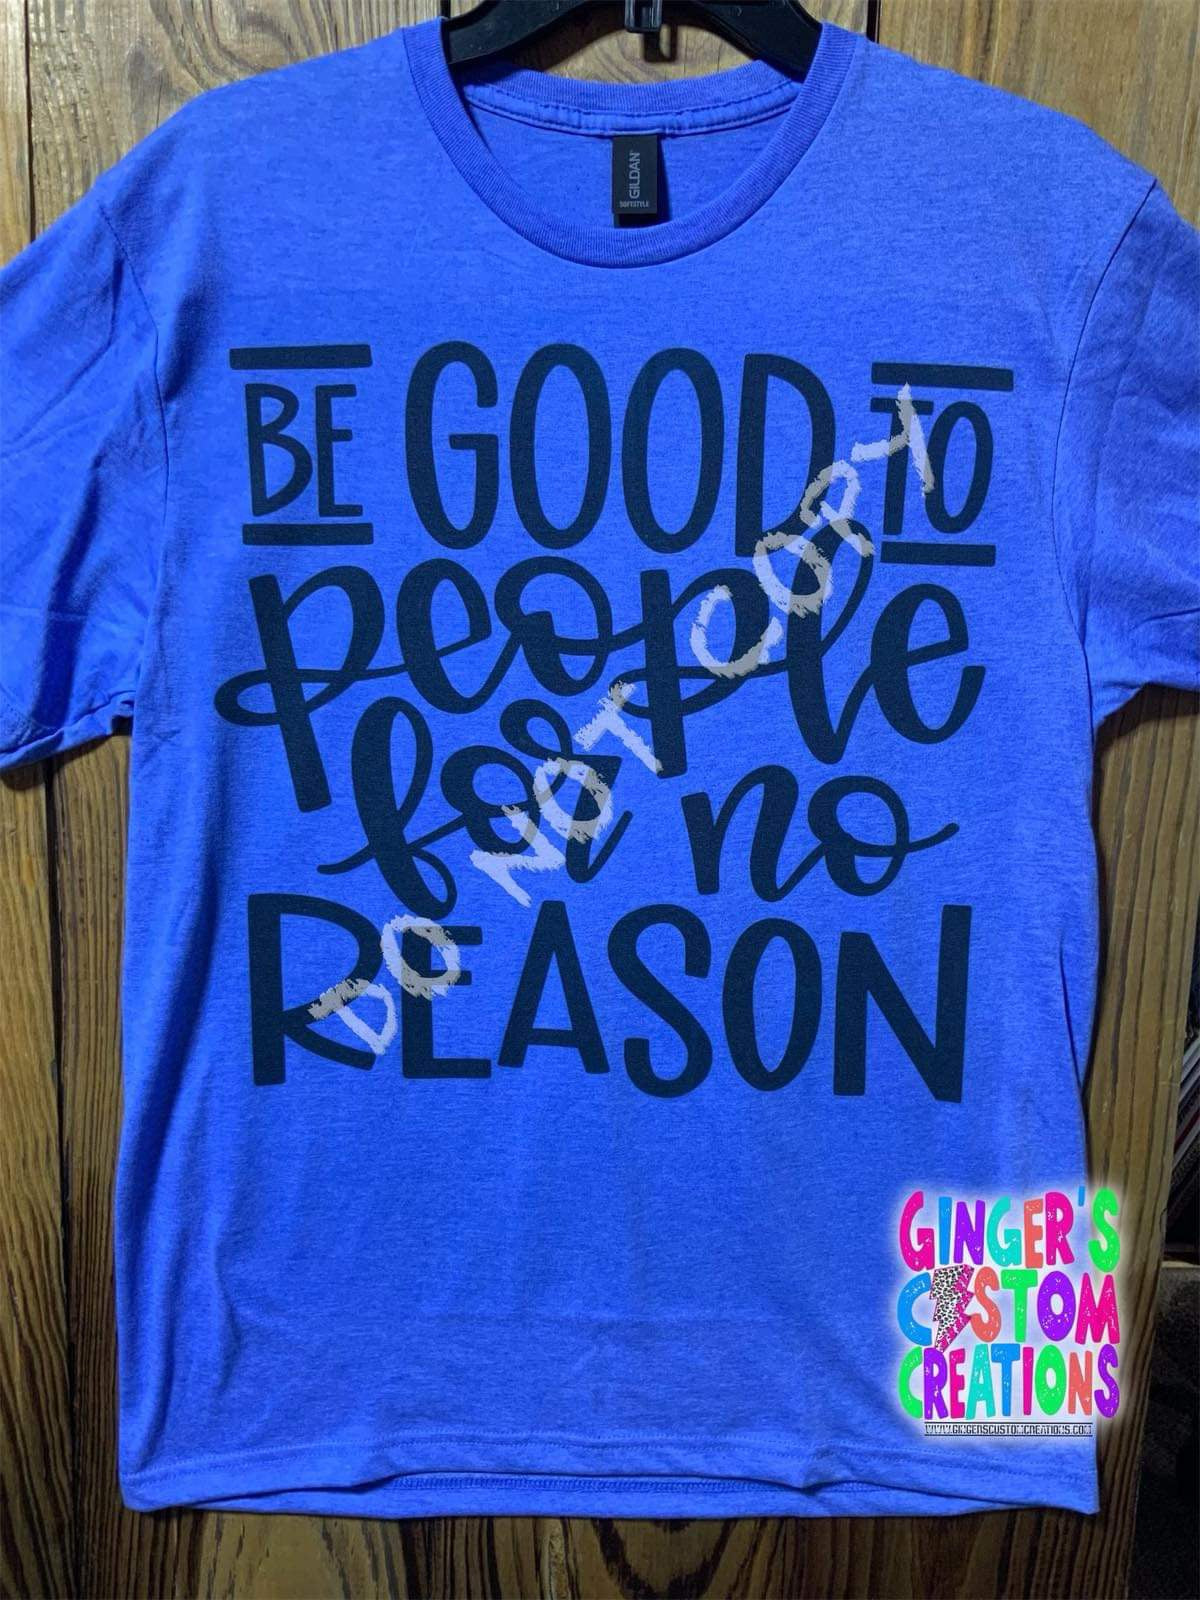 BE GOOD TO PEOPLE FOR NO REASON BLUE SHIRT